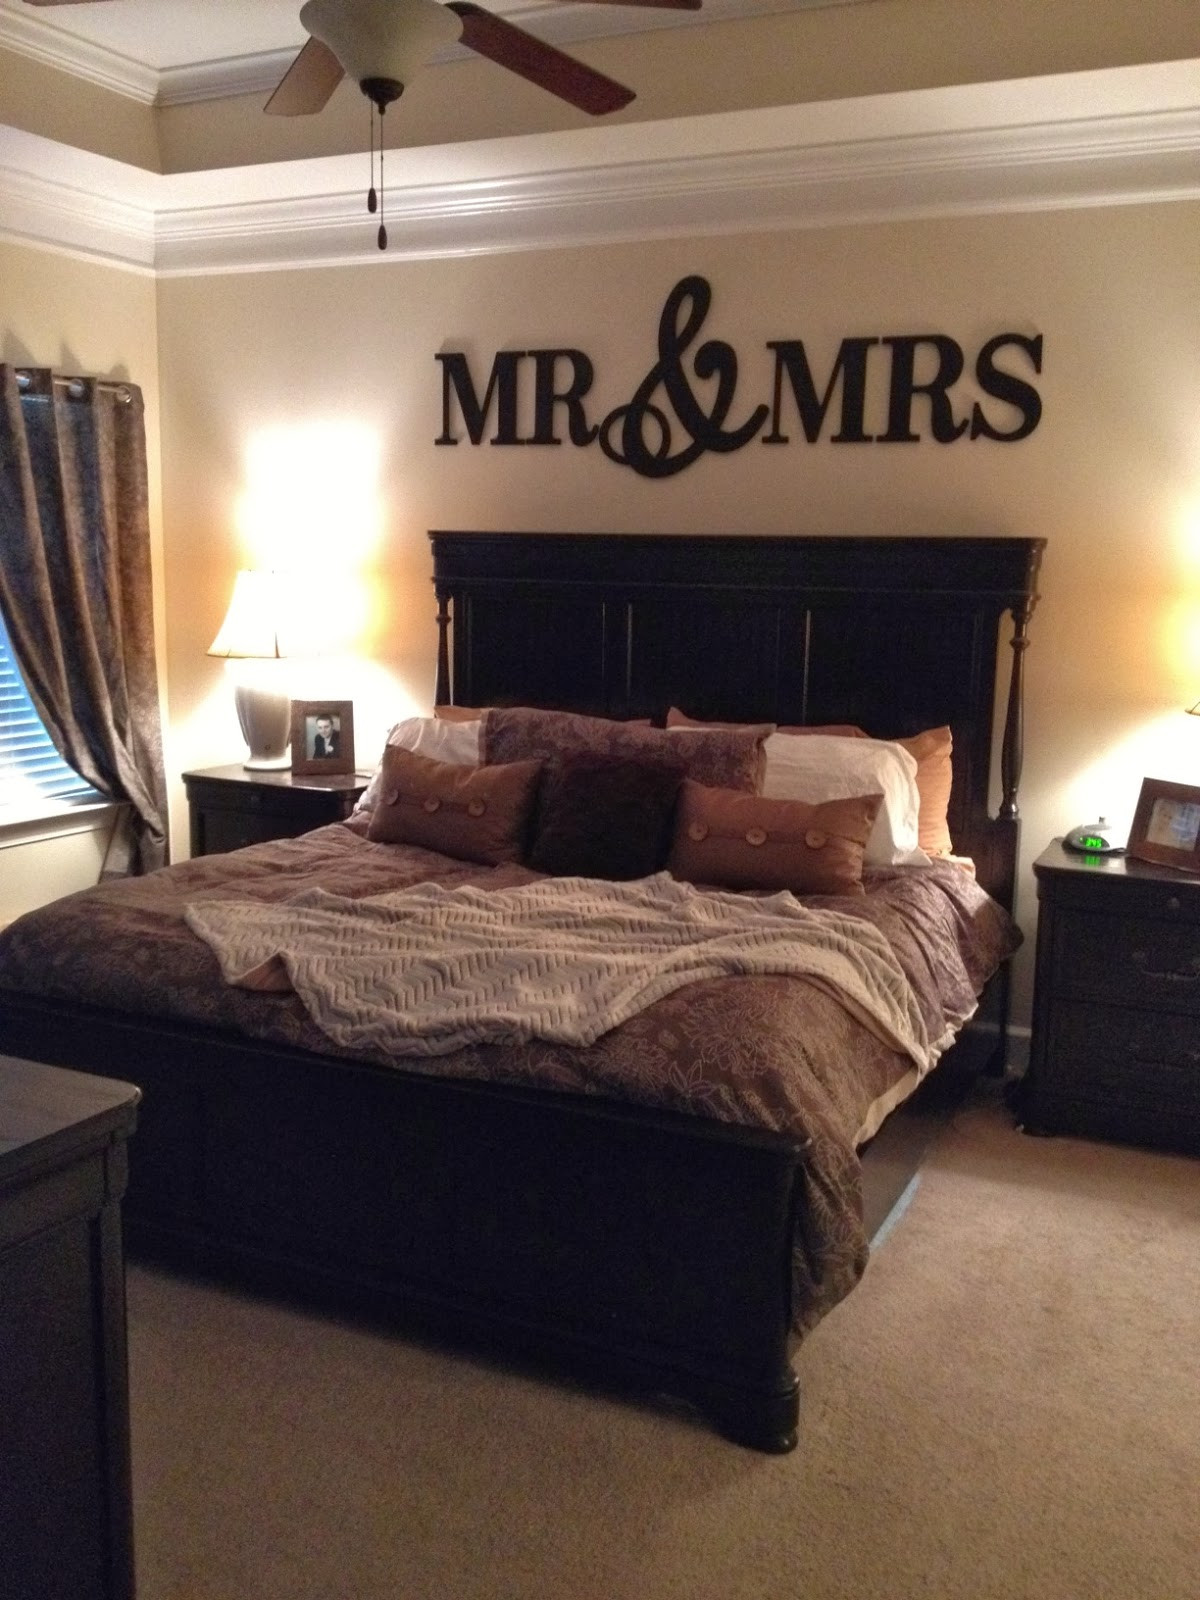 Bedroom Wall Decor Pinterest
 Simply The Simmons Mr & Mrs